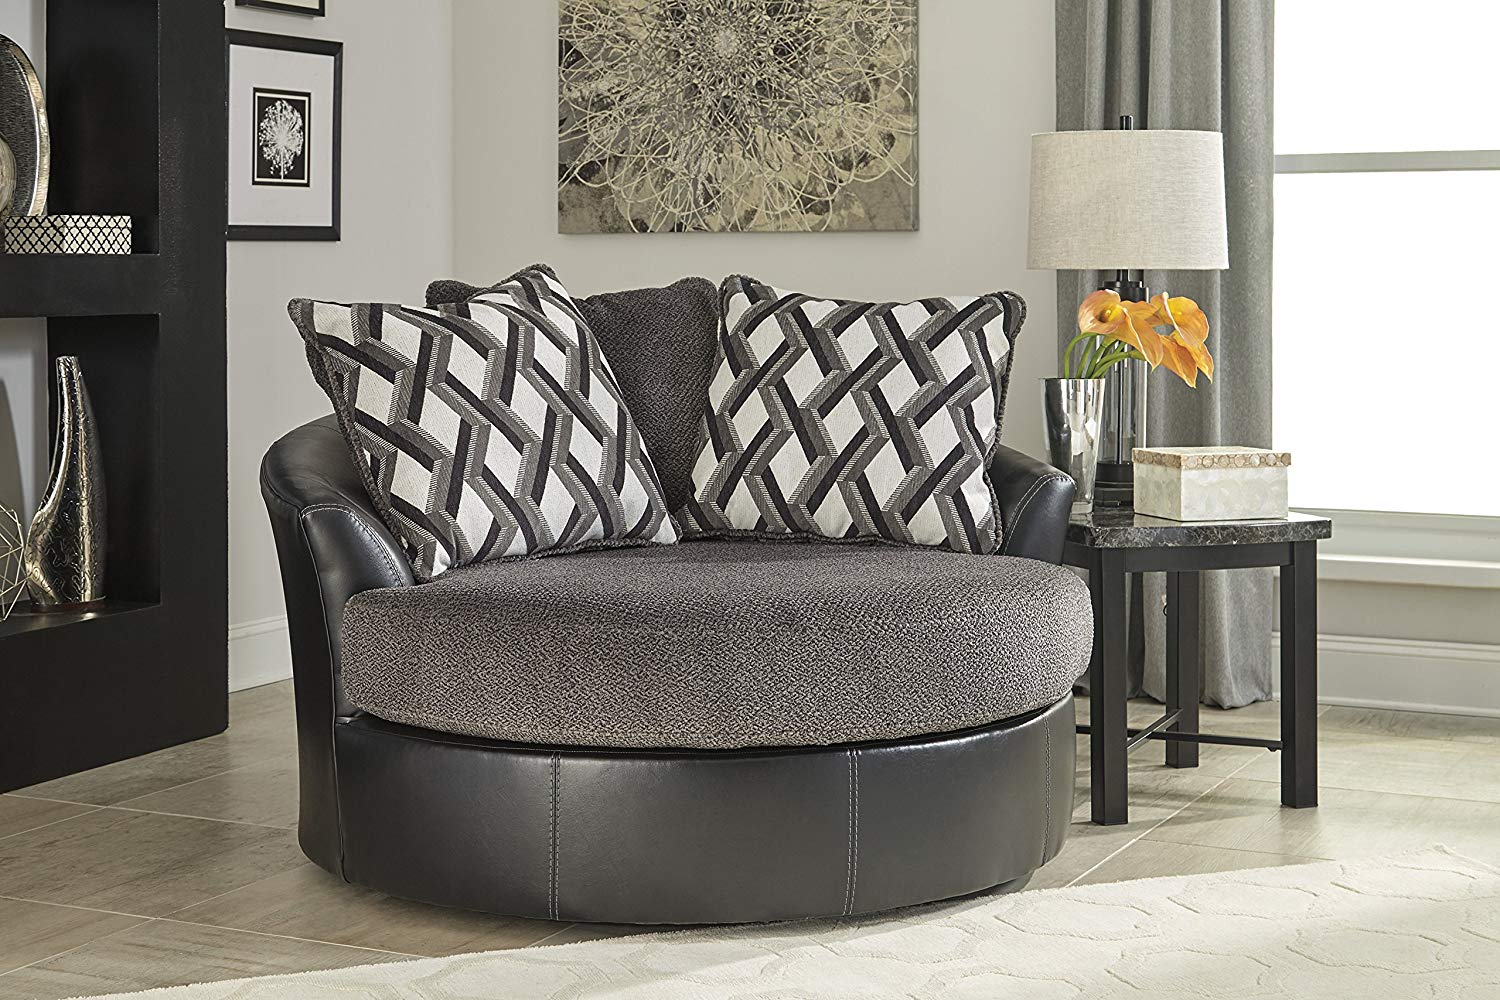 Oversized Swivel Barrel Chair With Faux Leather Upholstery Matching Accent Pillows For Living Room Media Room 